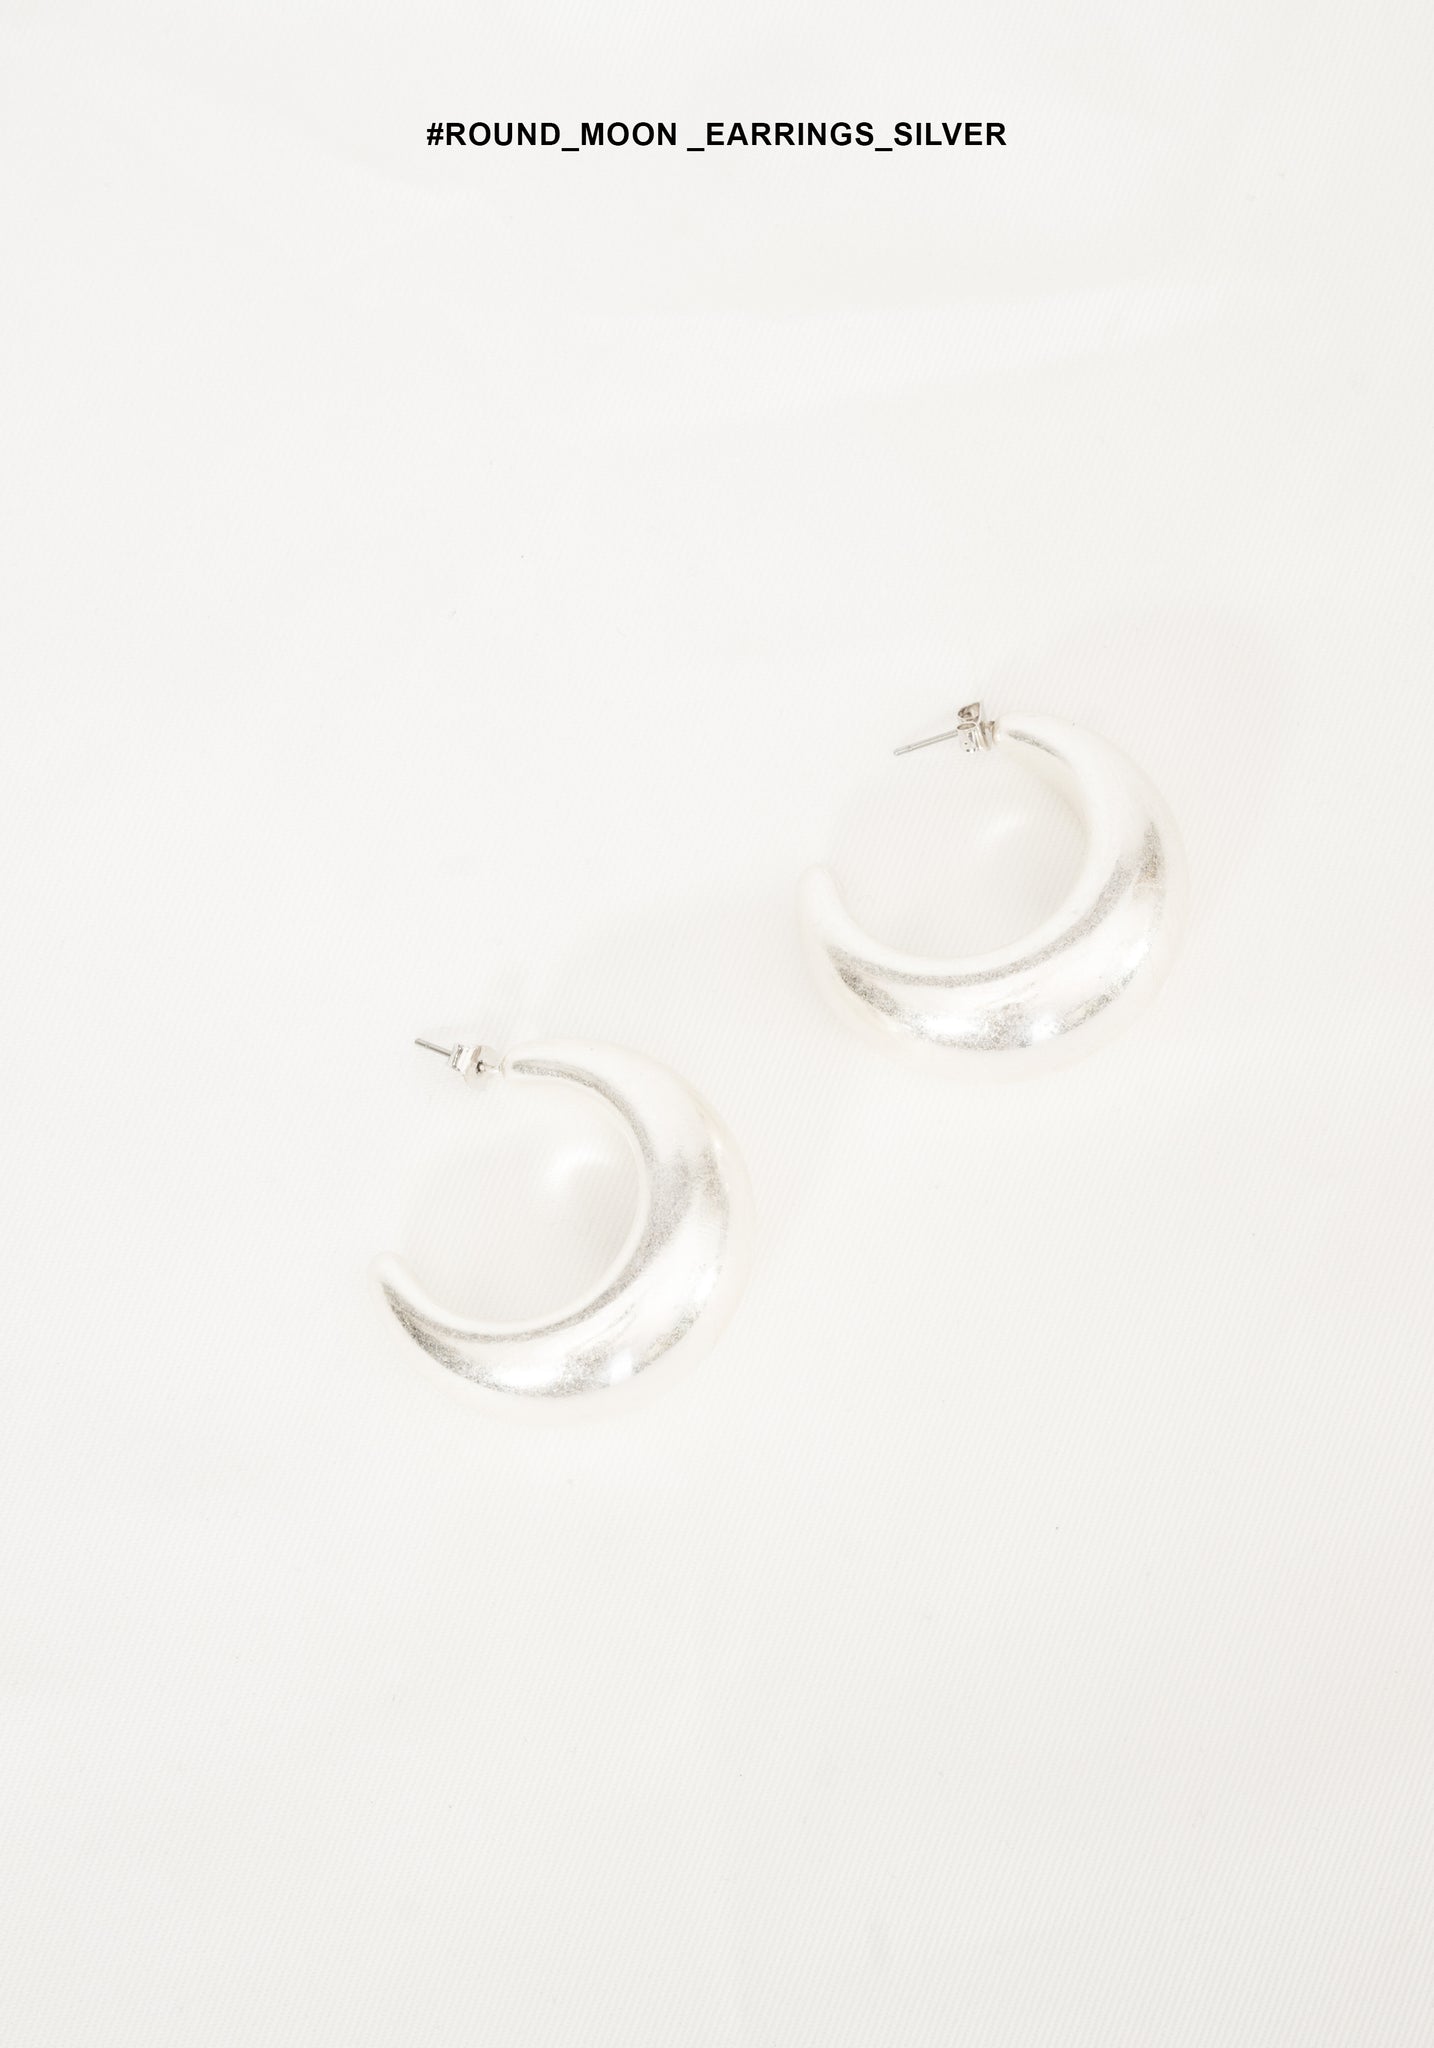 Round Moon Earrings Silver - whoami